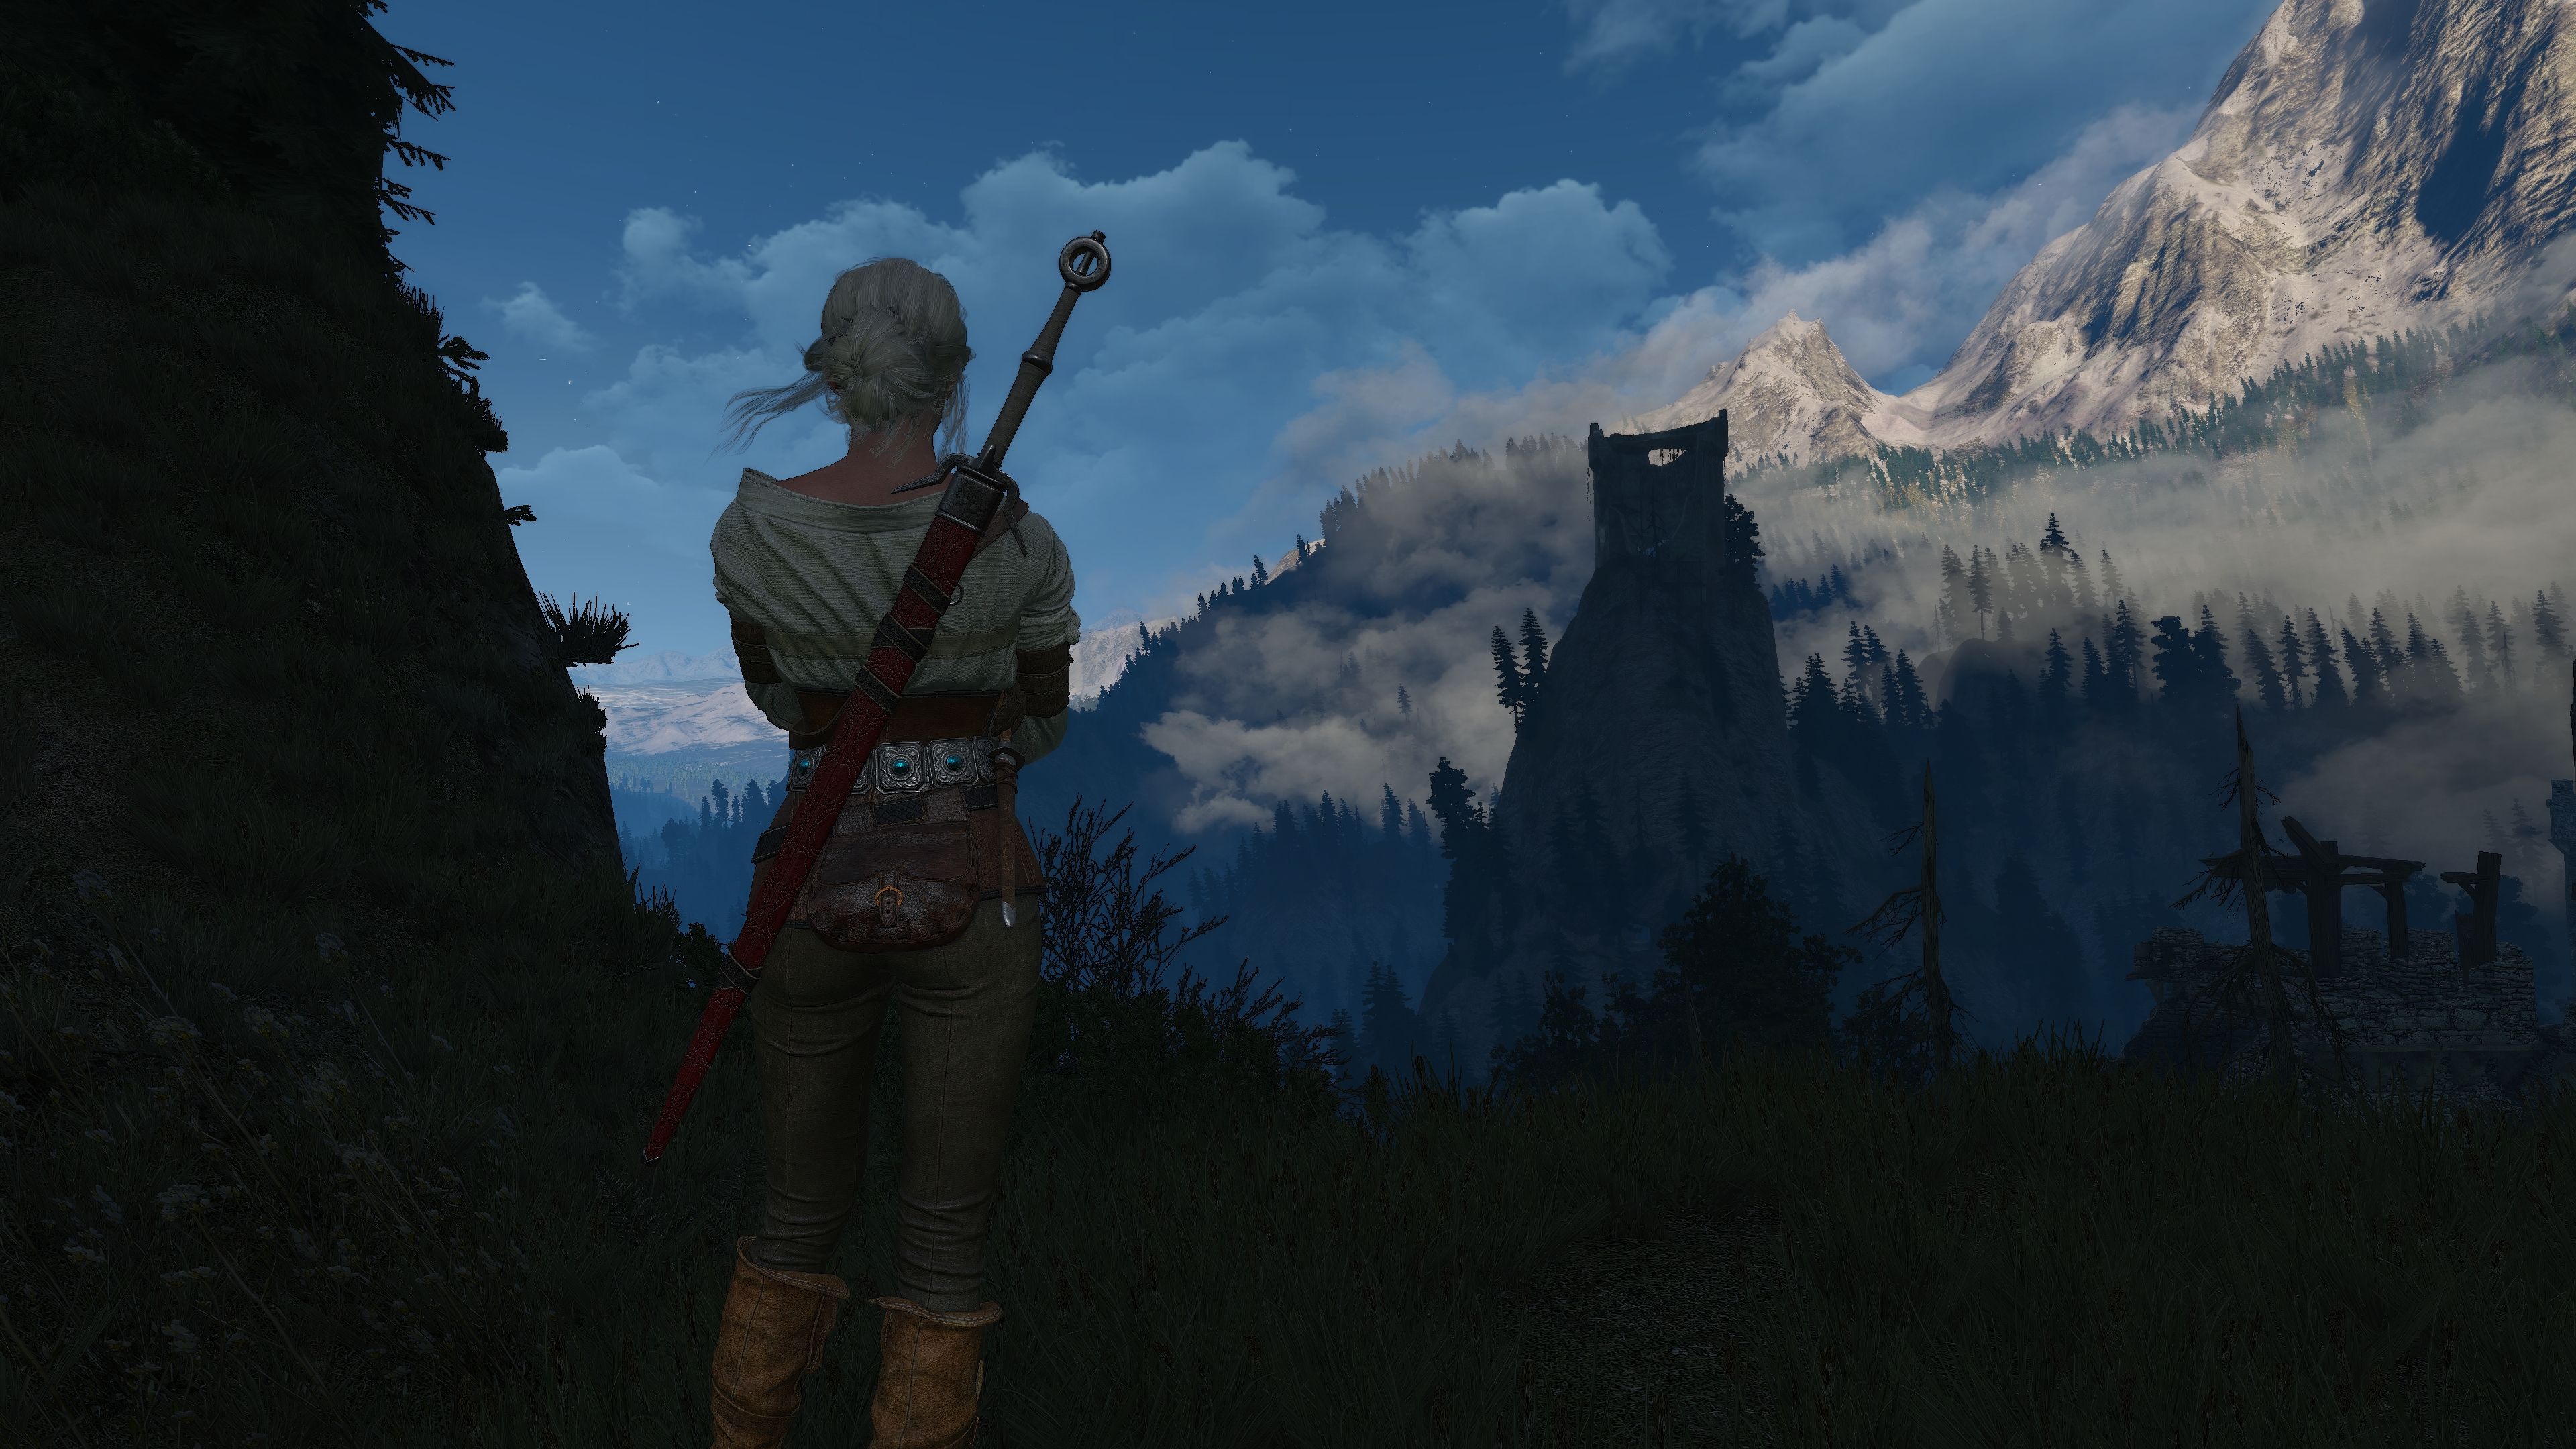 General 3840x2160 The Witcher 3: Wild Hunt screen shot PC gaming Cirilla Fiona Elen Riannon Kaer Morhen The Witcher video game characters CGI video game art standing video game girls short hair gray hair hairbun sky clouds trees sword women with swords looking into the distance mist